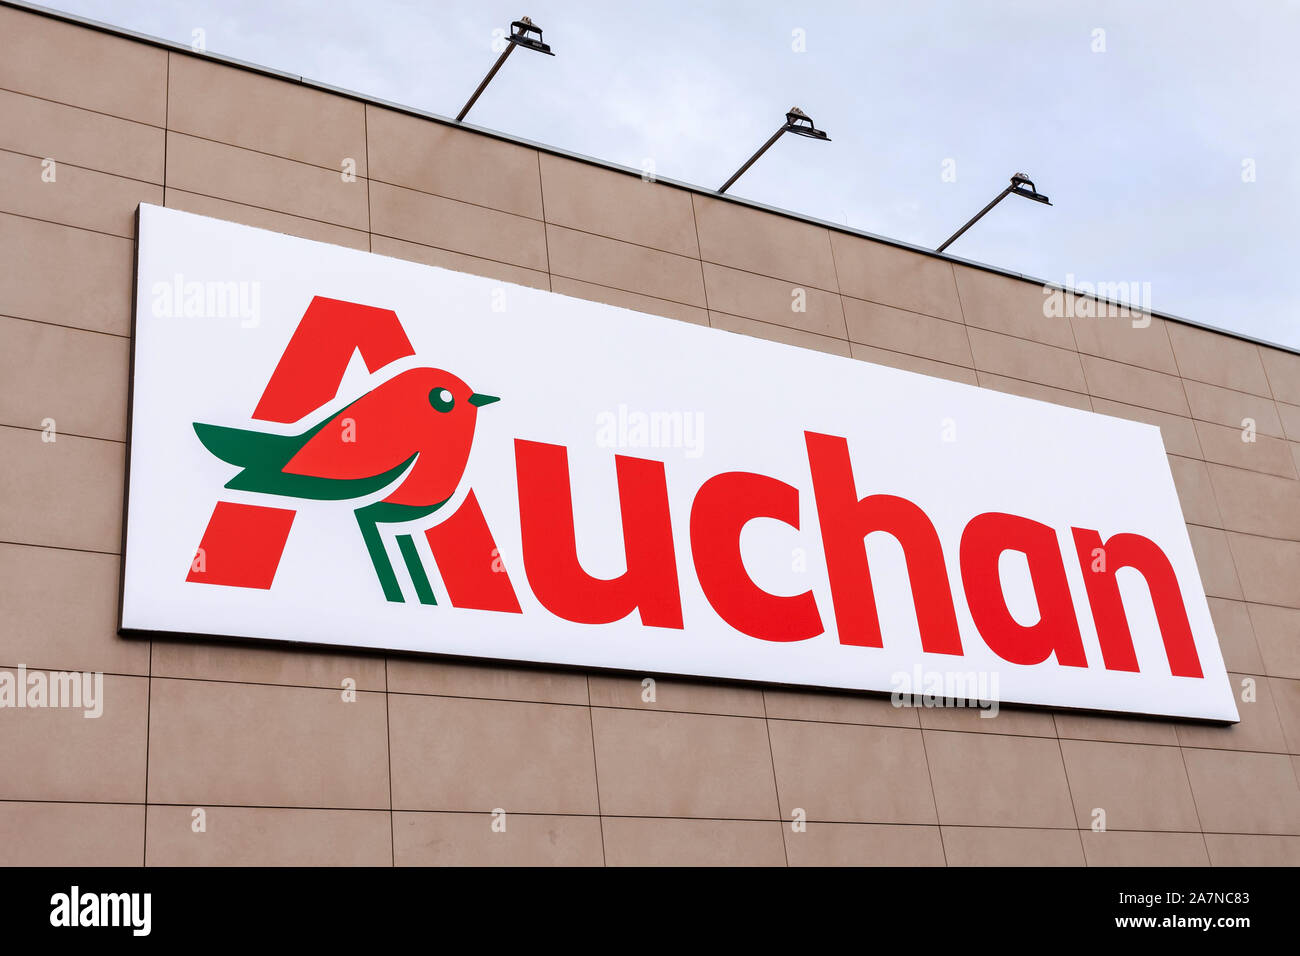 Coina, Portugal. Auchan logo or symbol in the Barreiro Planet Retail Park. Auchan is a French hypermarket, supermarket or superstore chain. Auchan. Stock Photo